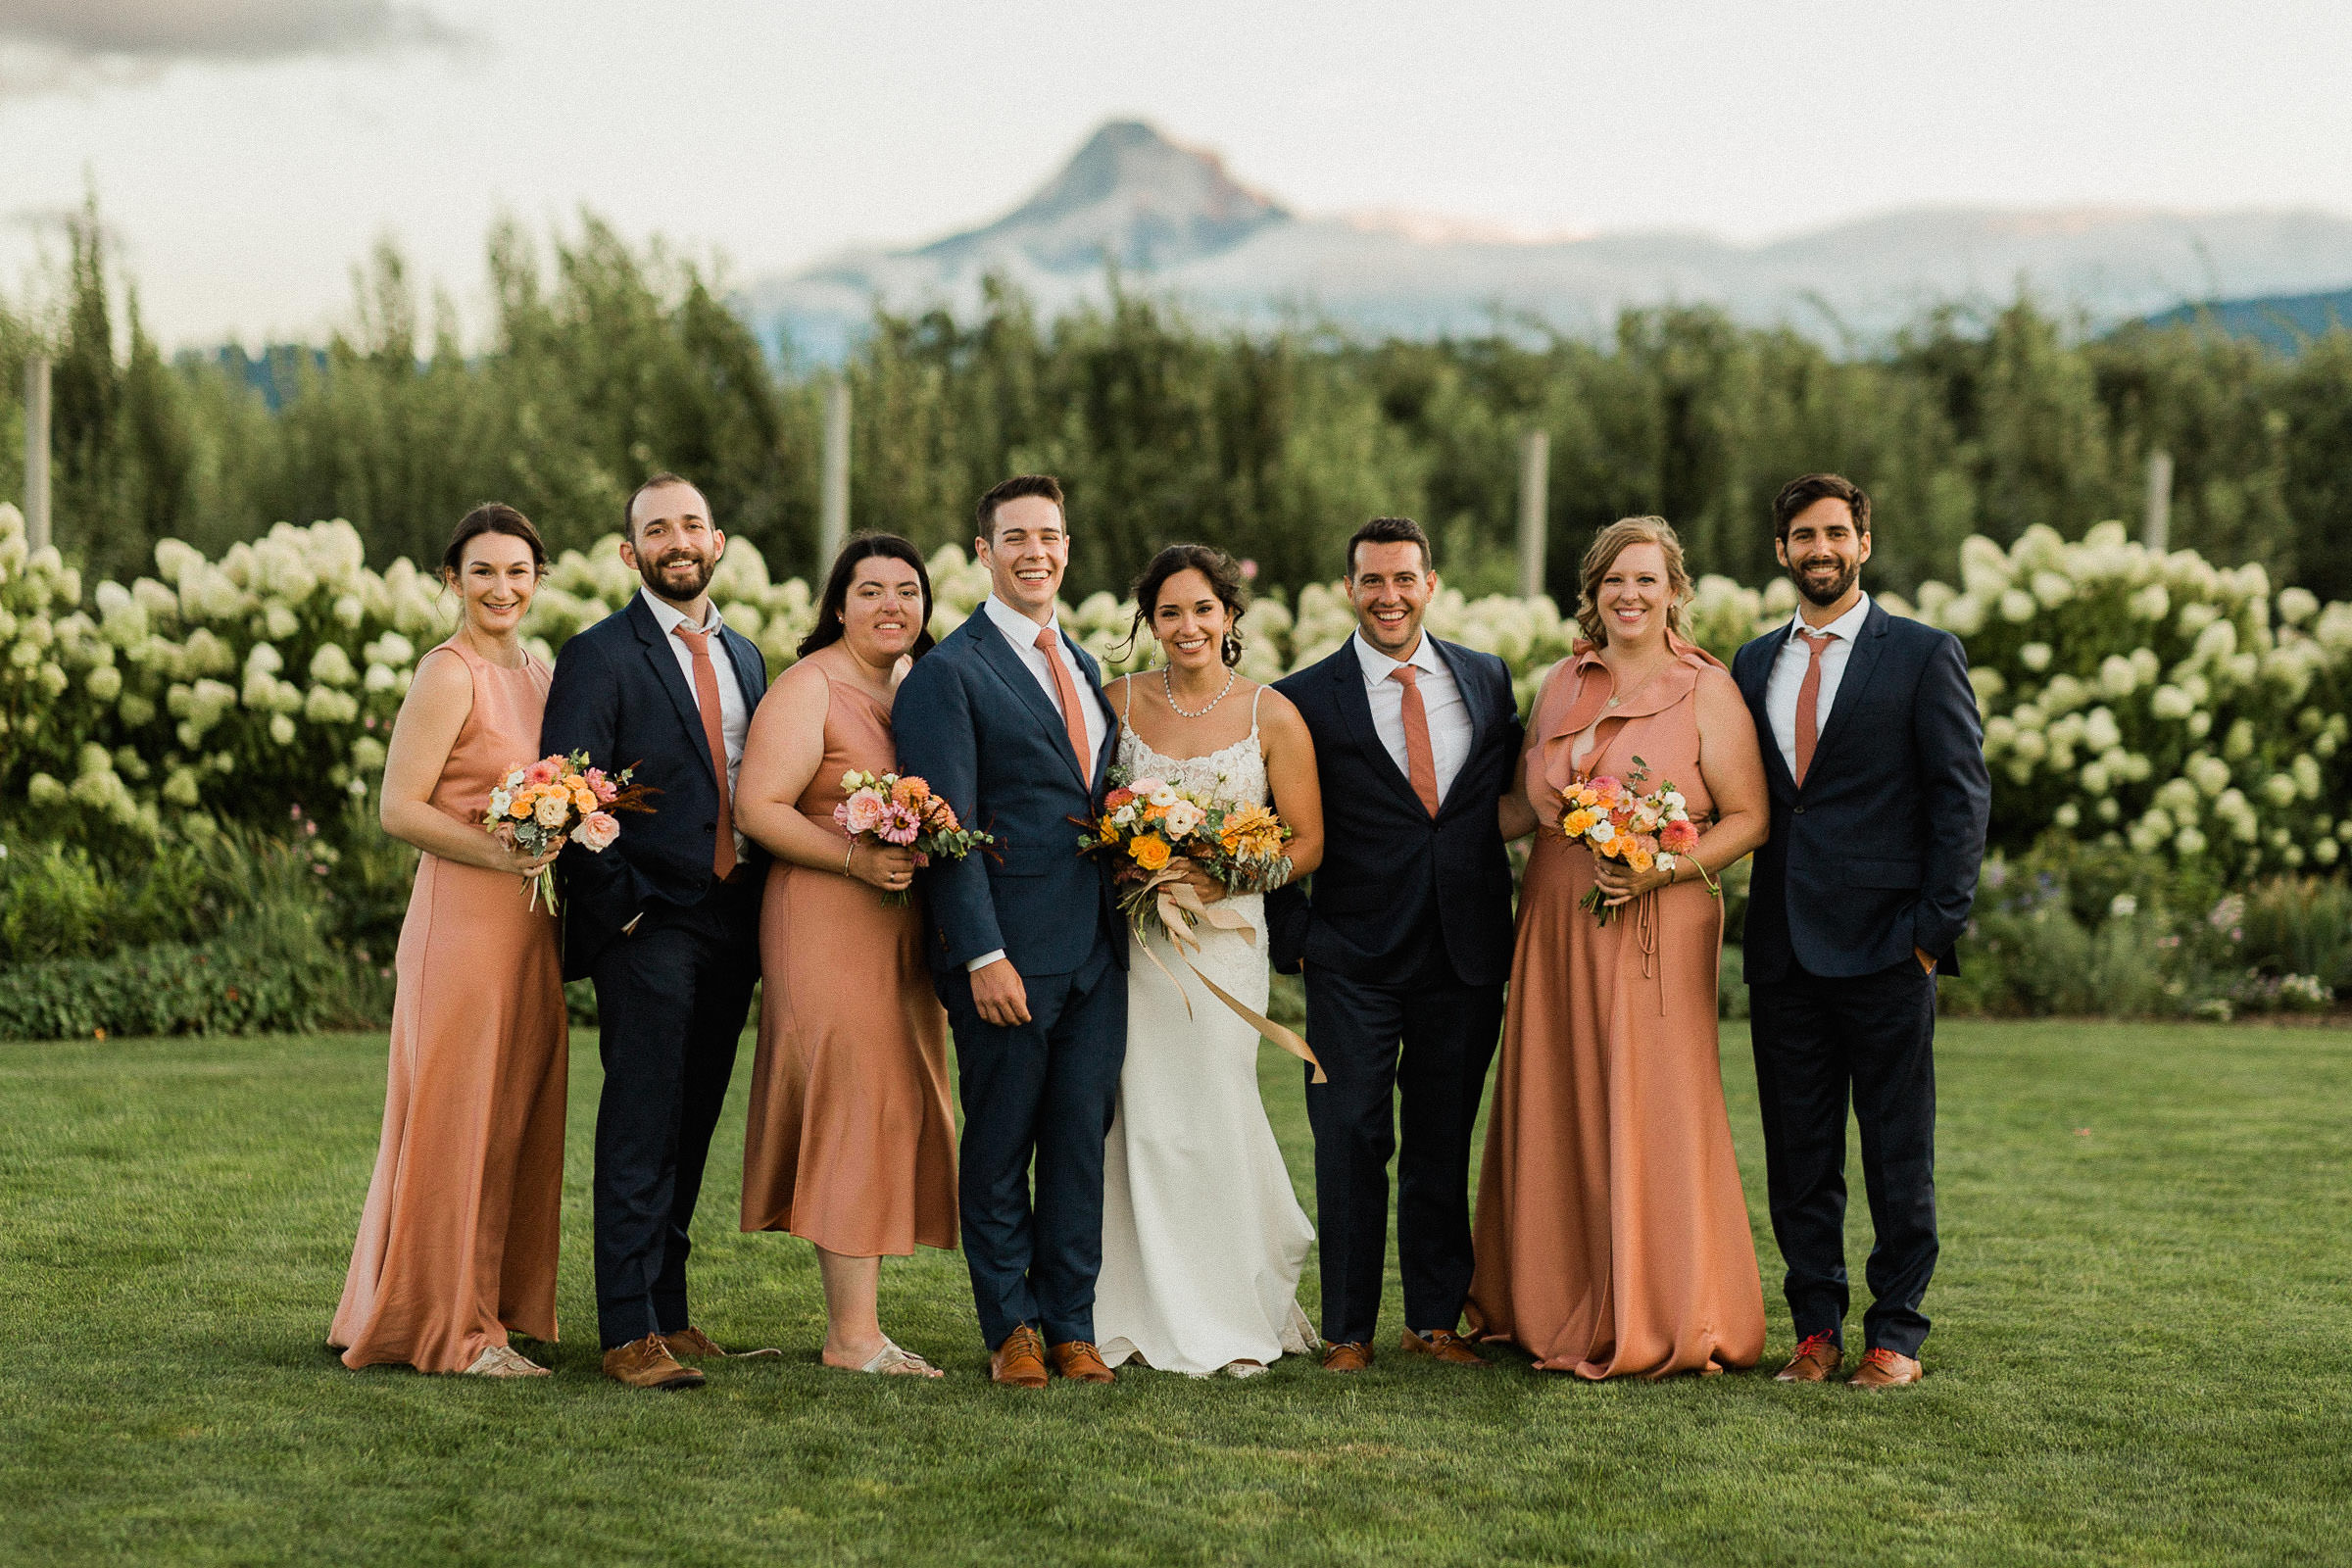 Wedding party poses at The Orchard with a view of Mount Hood